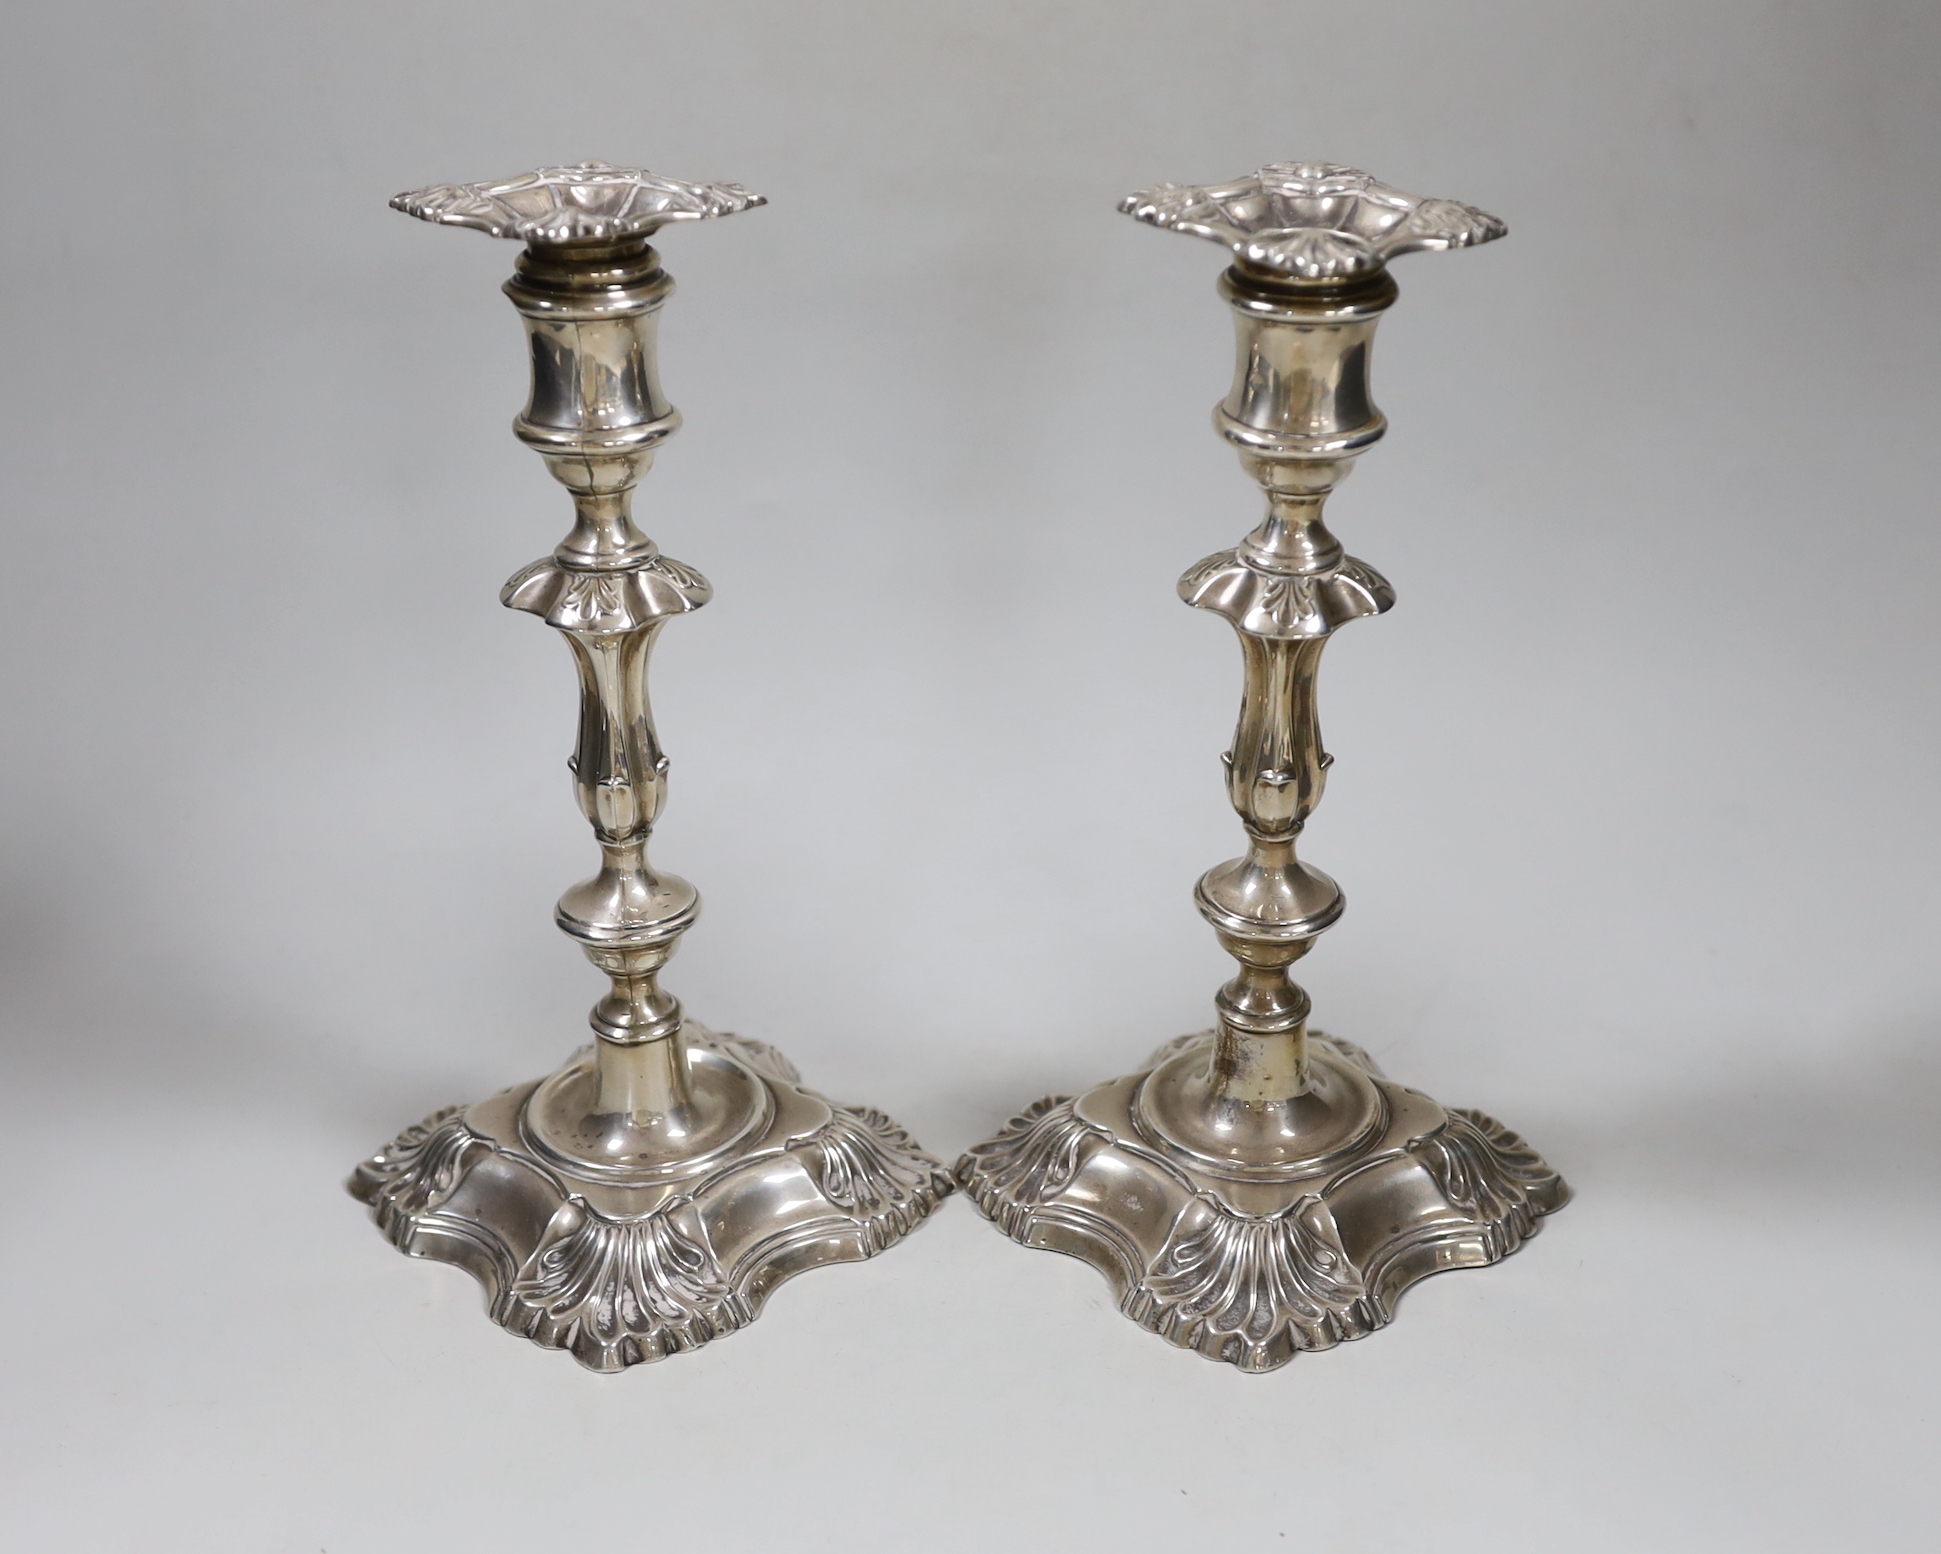 A pair of George V silver mounted candlesticks, with waisted knopped stems, William Hutton & Sons, London, 1910, height 22.7cm, weighted.                                                                                   